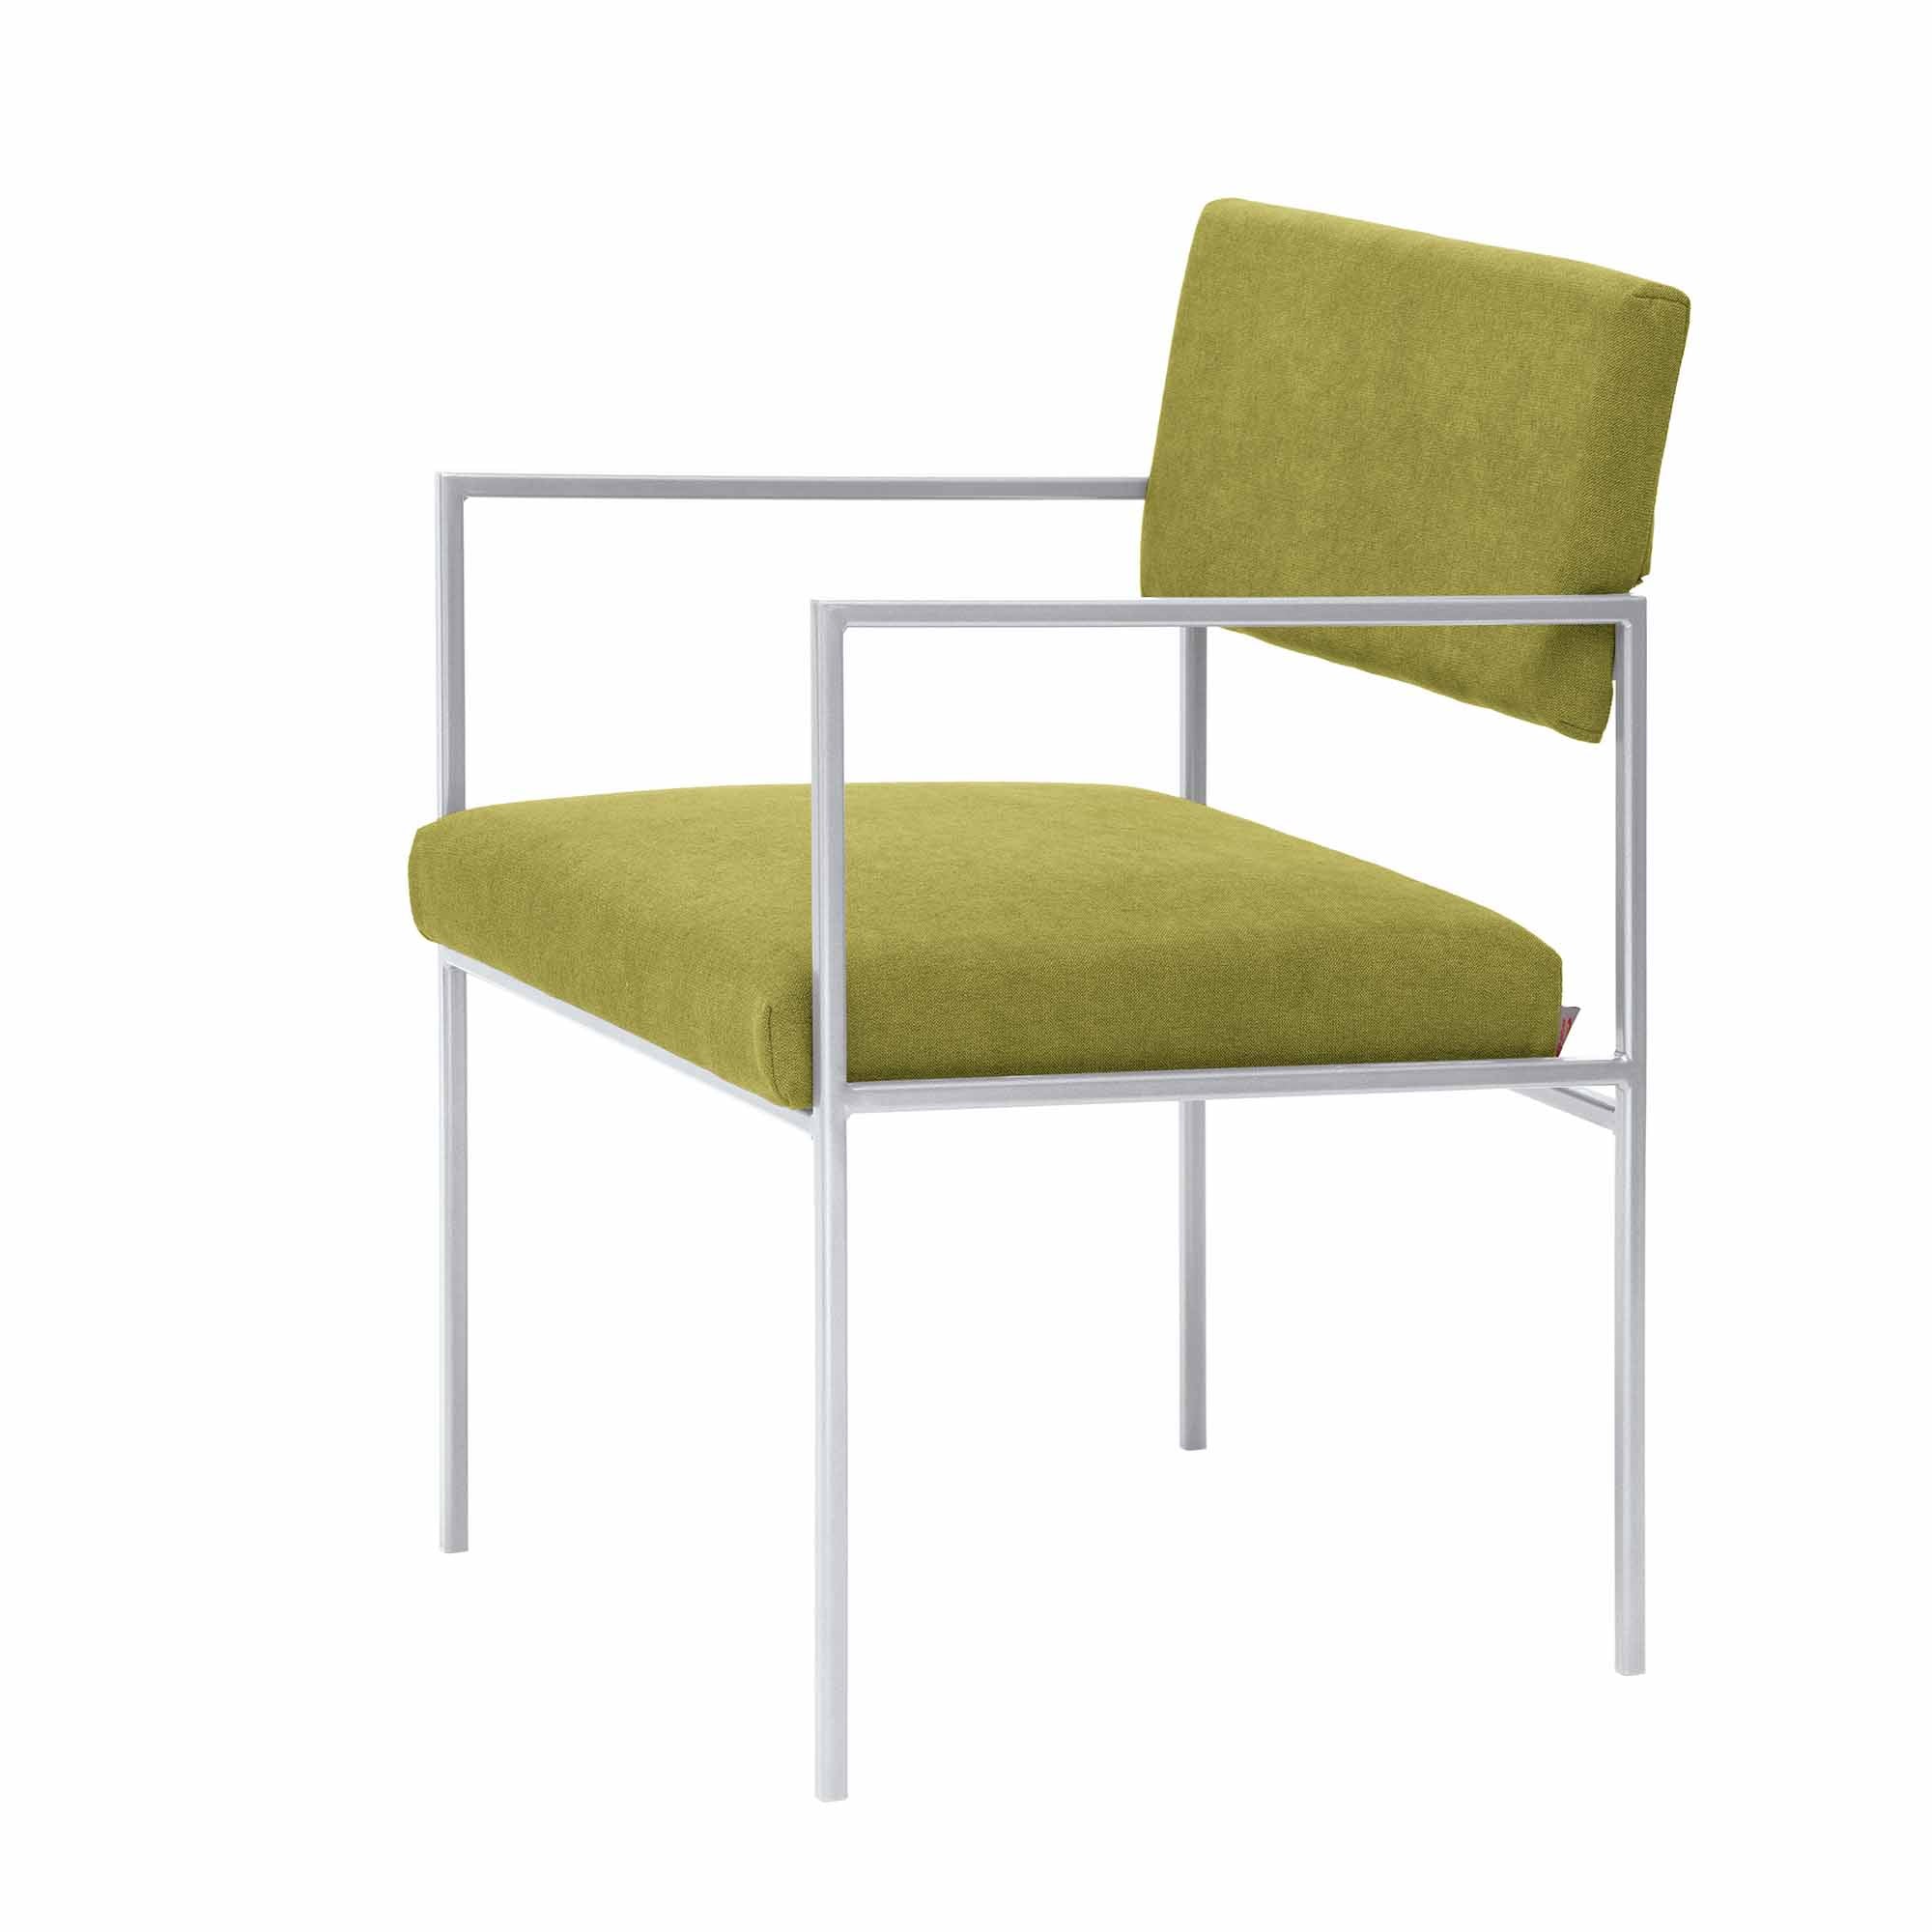 CUBE Armchair, Powder-Coated Steel Frame white grame, green fabric, half-side view